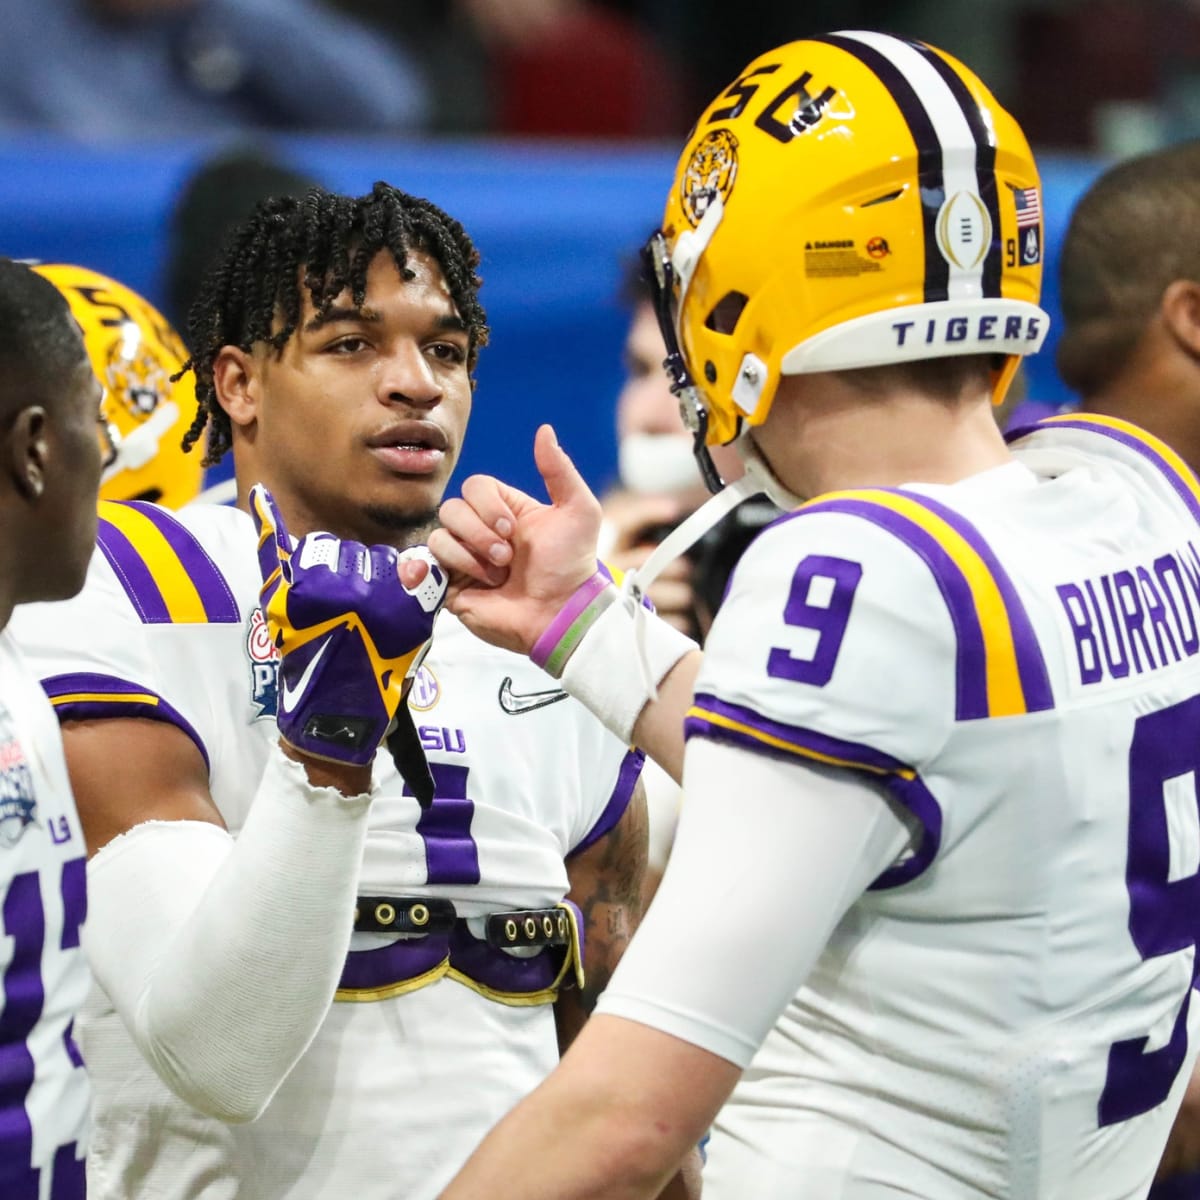 Joe Burrow, Ja'Marr Chase And The Bengals Are Ahead Of Schedule